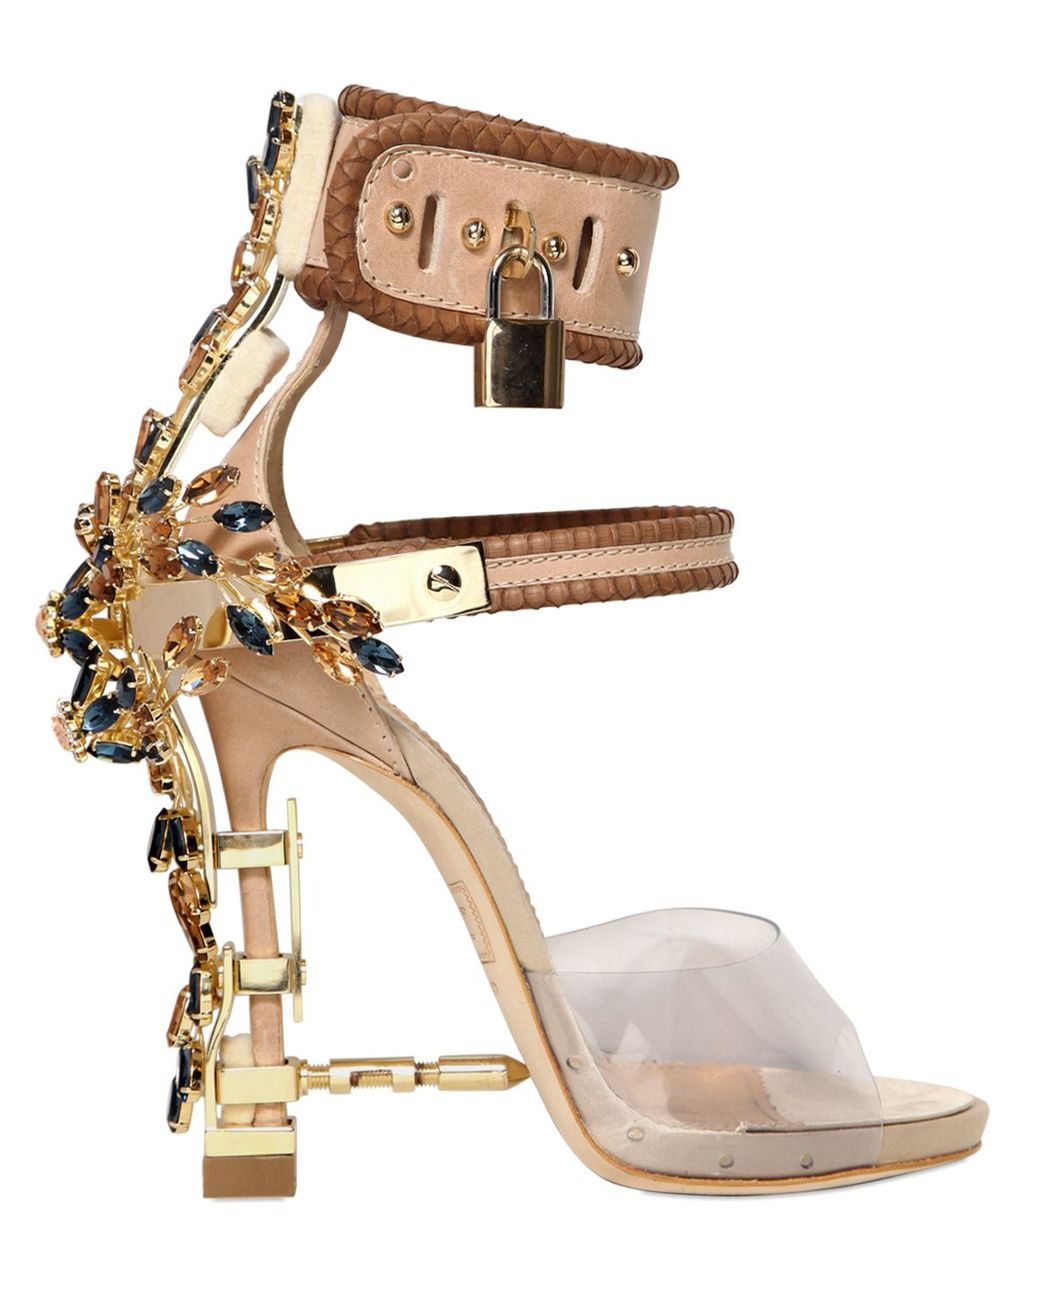 DSQUARED2 | Shoes | Blue Crystal Stoned Heels With Lock Embellish On Strap  | Poshmark